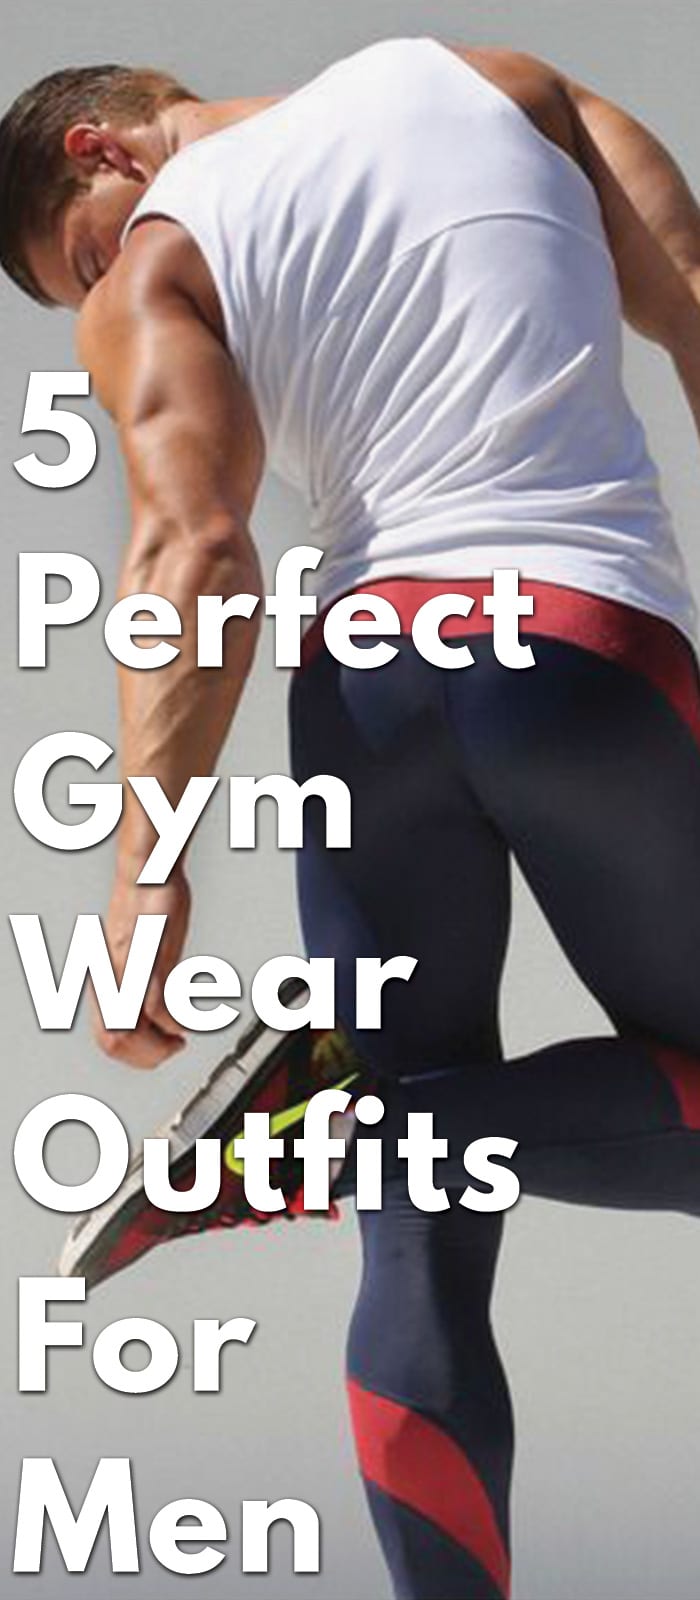 5-Perfect-Gym-Wear-Outfits-For-Men